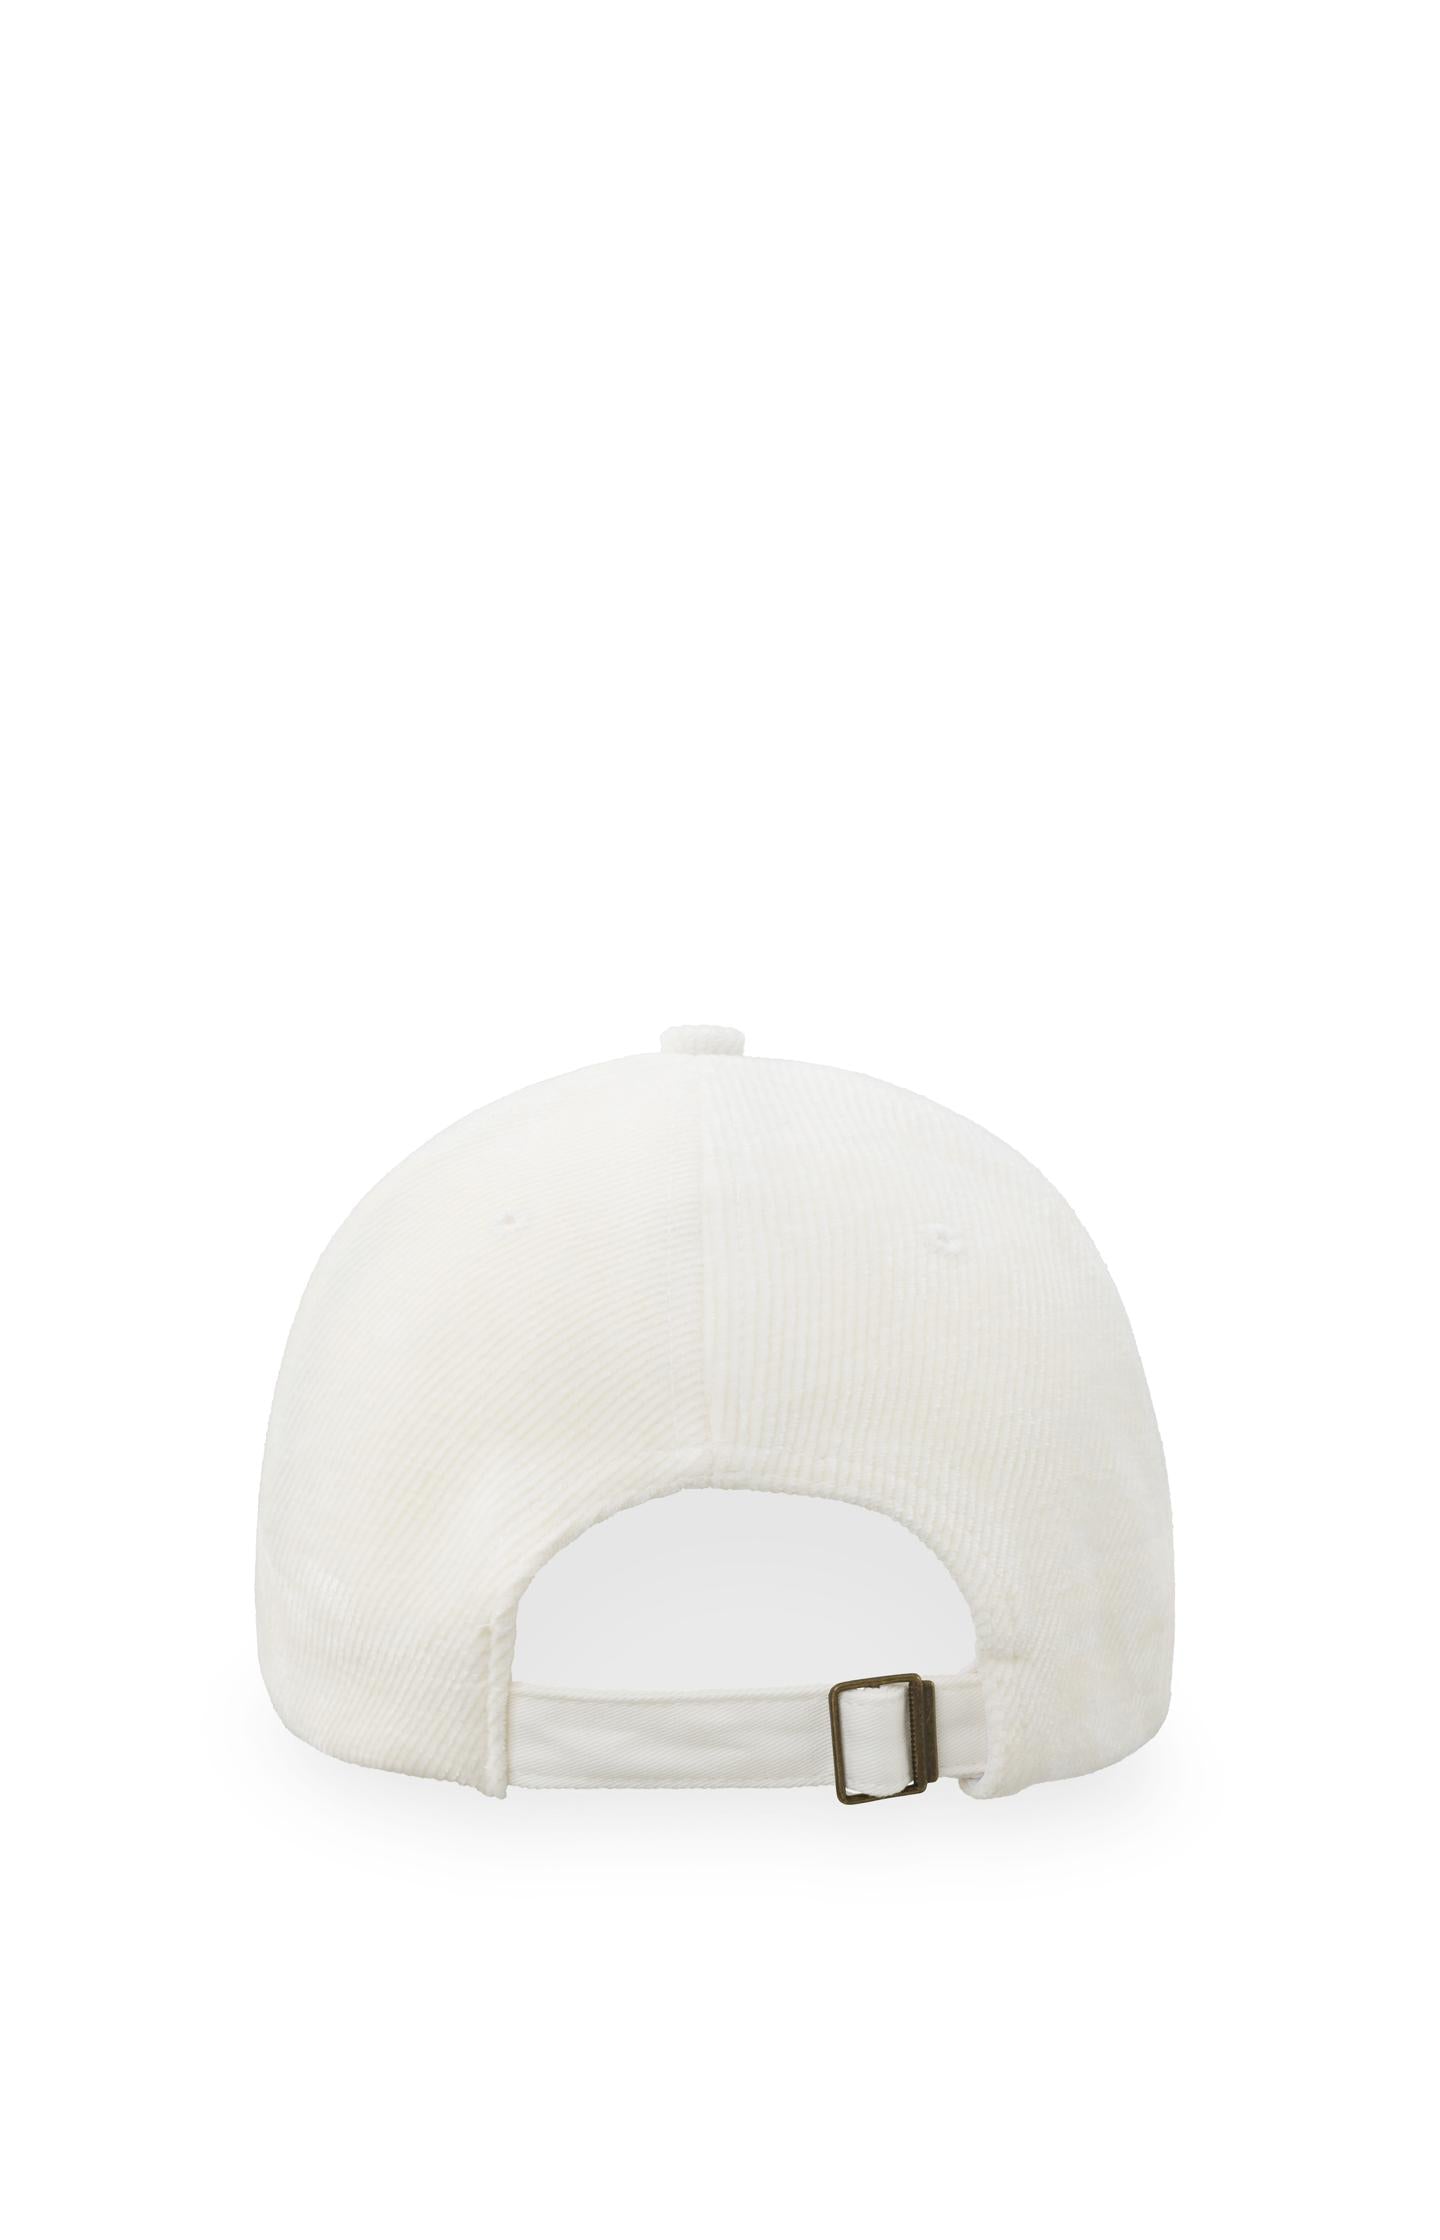 Knitted baseball cap with ribbed details and adjustable back - Onyx White